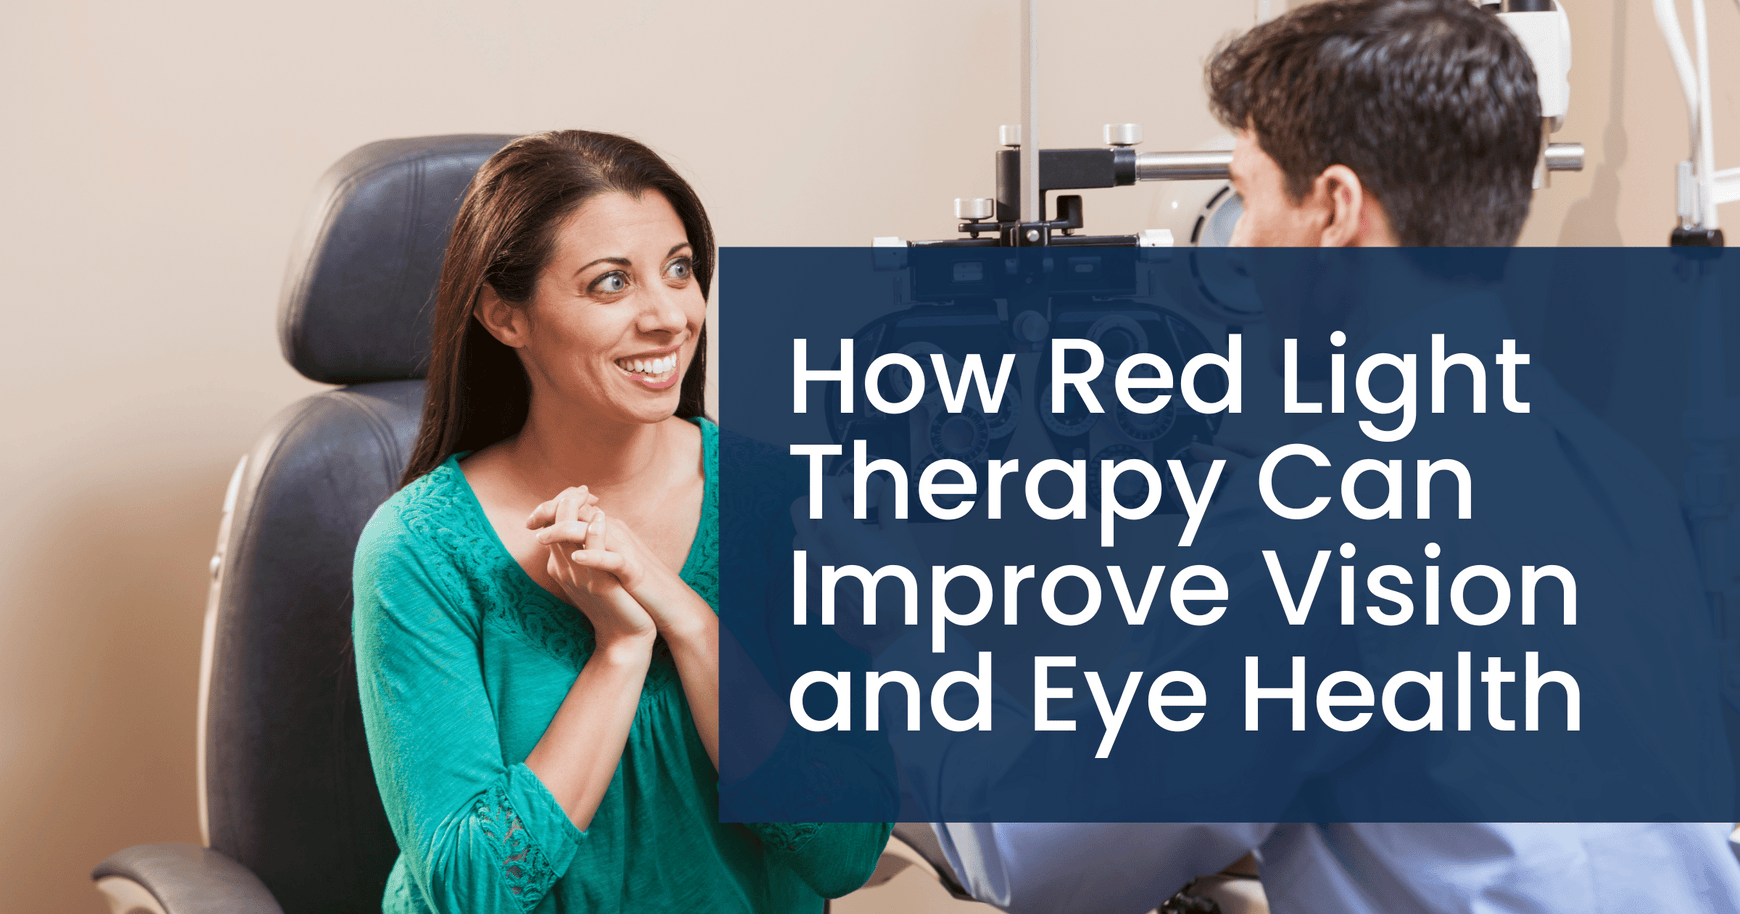 How Red Light Therapy Can Improve Vision and Eye Health